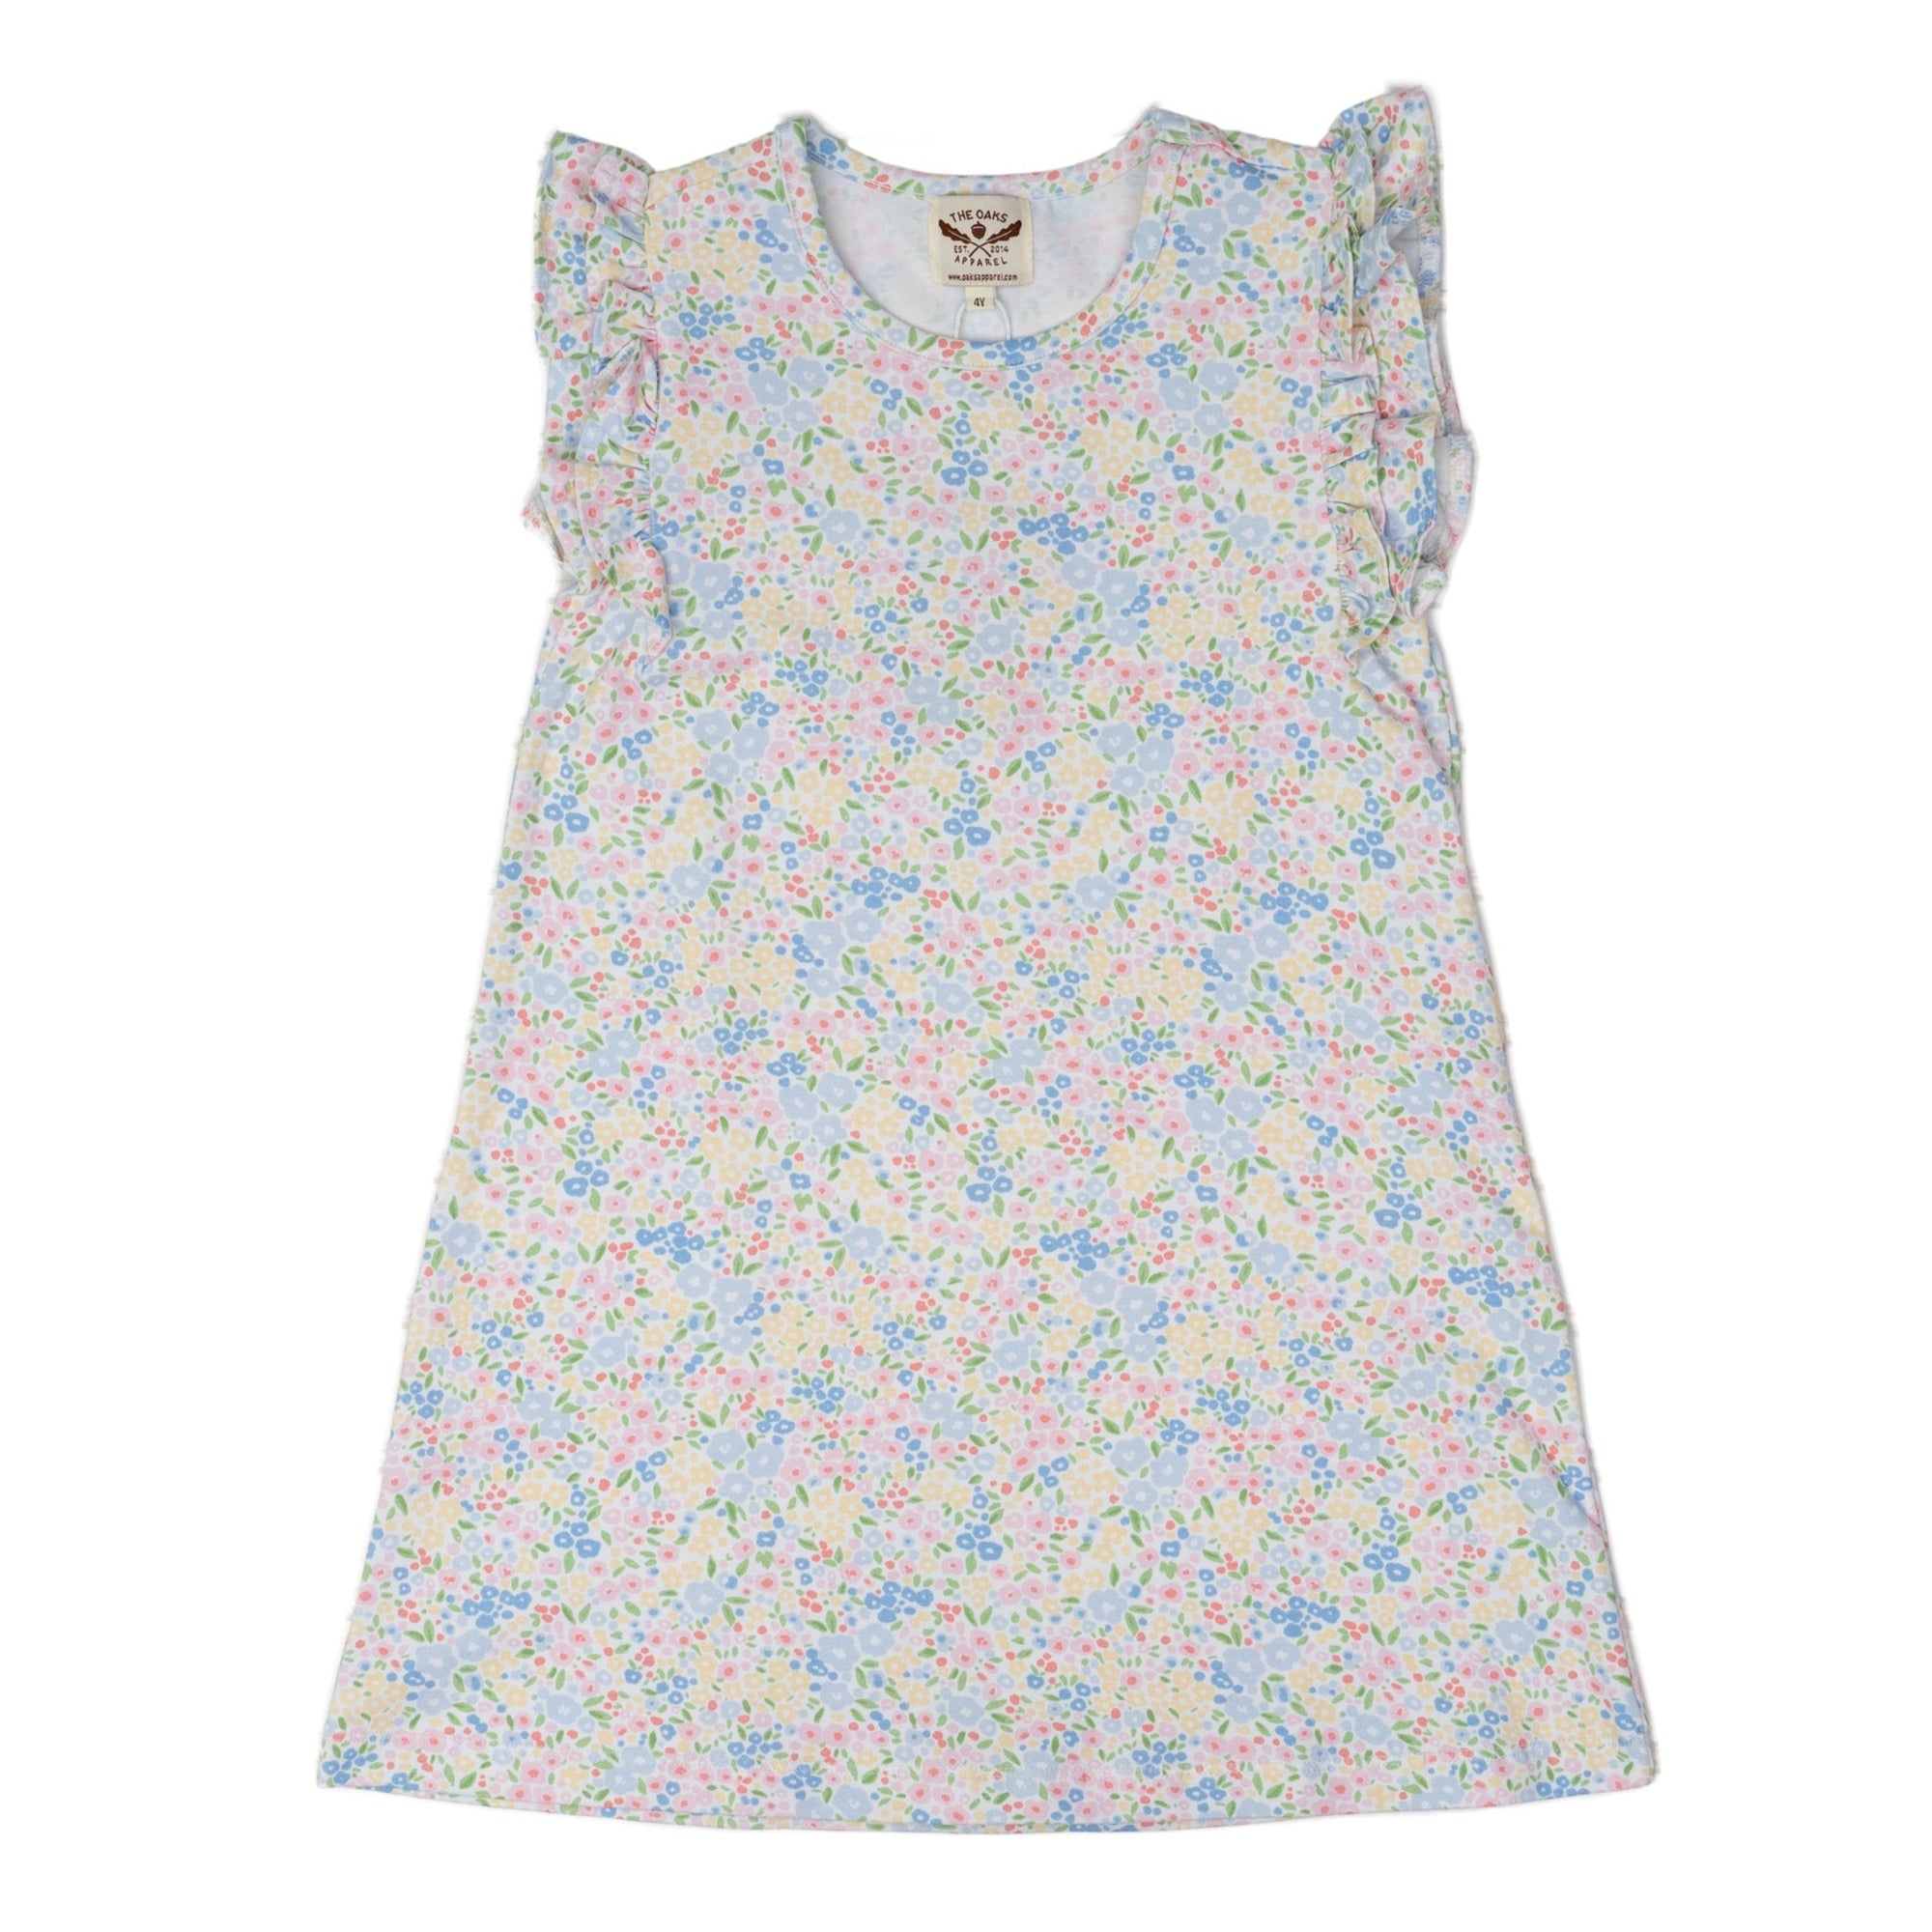 Spring Floral Toddler Girl's Knit Daisy Dress by The Oaks